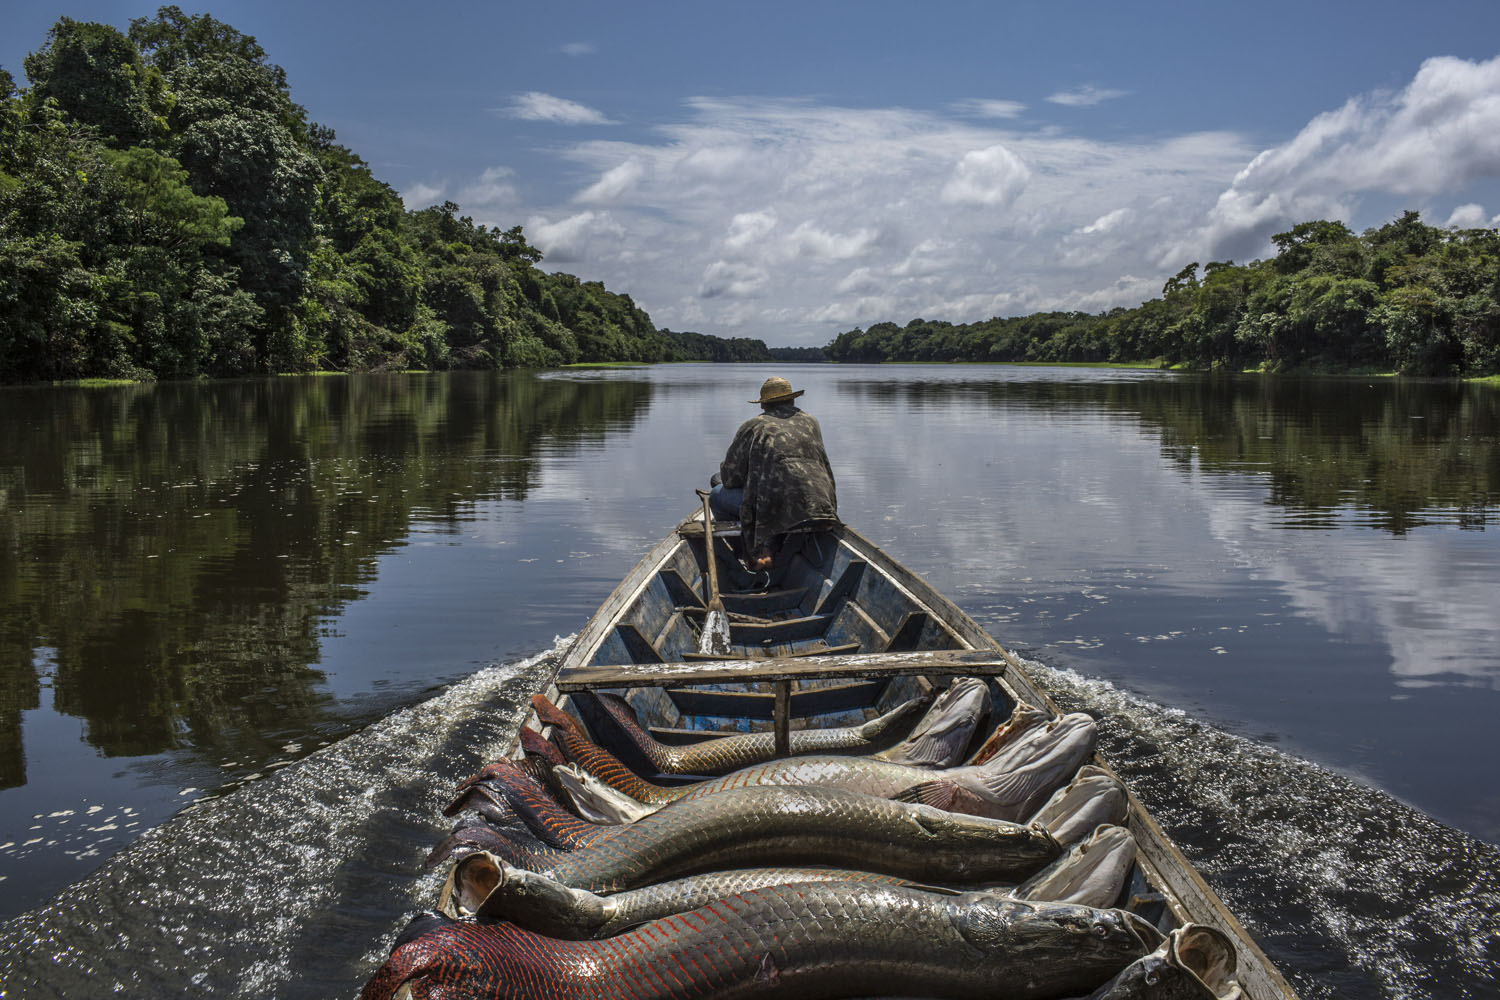 A fisherman guides his canoe laden with pirarucu out of Lago do Macaco, or Monkey's Lake, in Brazilís Amazonas region.